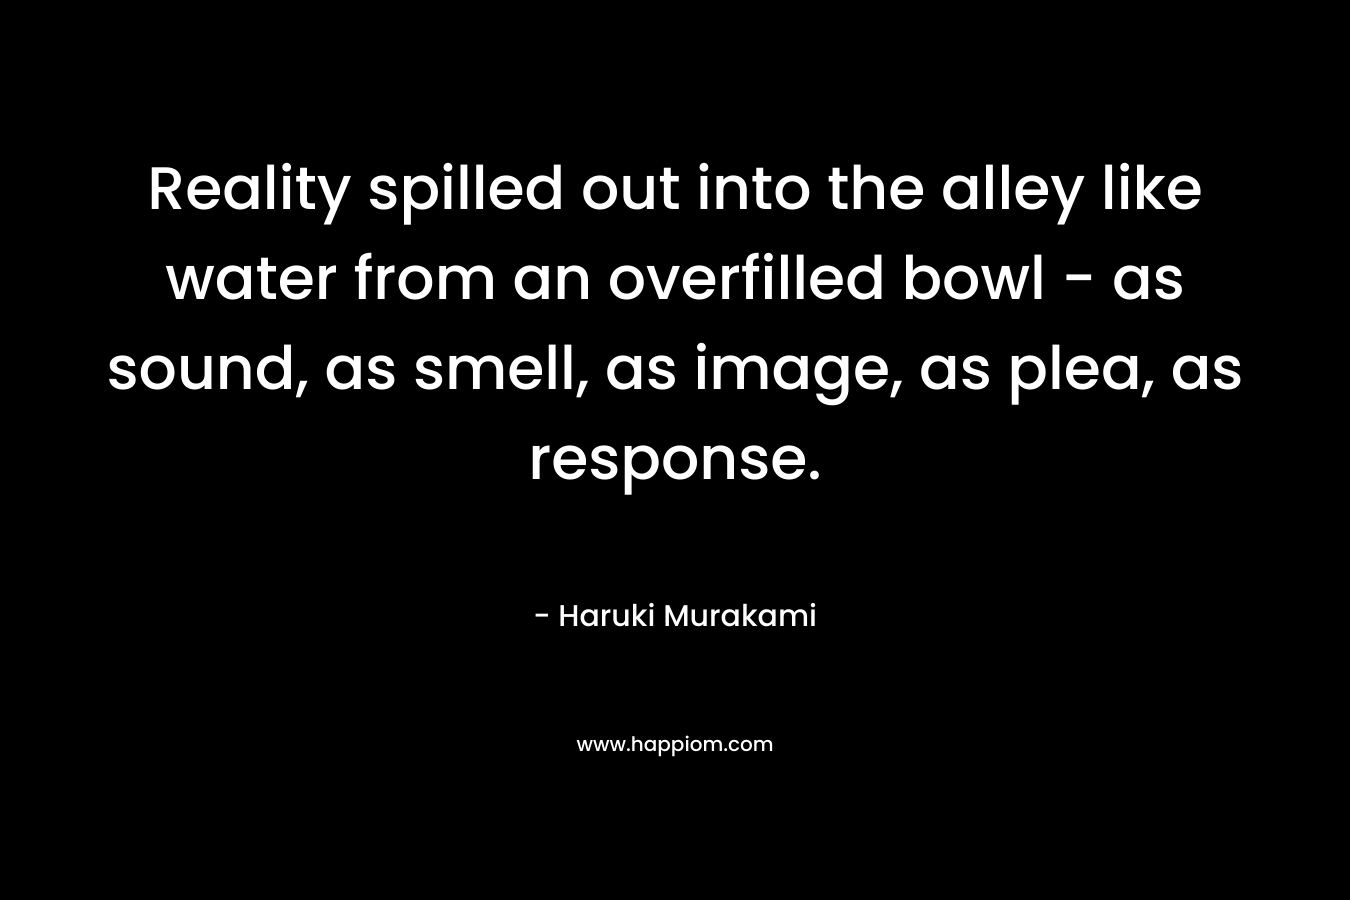 Reality spilled out into the alley like water from an overfilled bowl – as sound, as smell, as image, as plea, as response. – Haruki Murakami